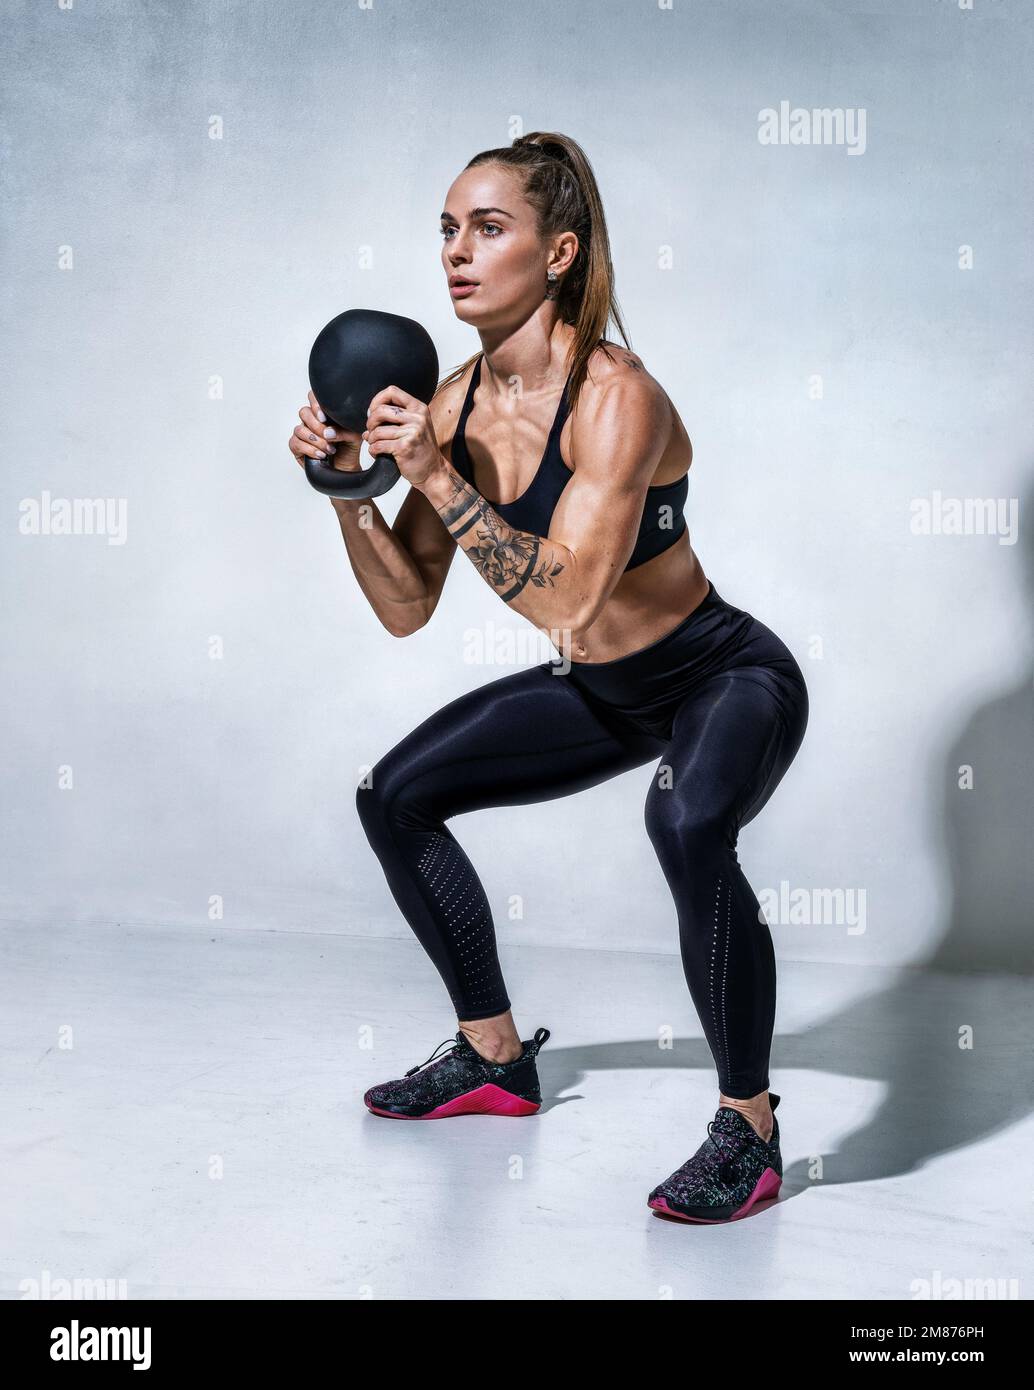 Sporty woman doing squats with kettlebell. Photo of woman with good  physique on grey background. Strength and motivation Stock Photo - Alamy